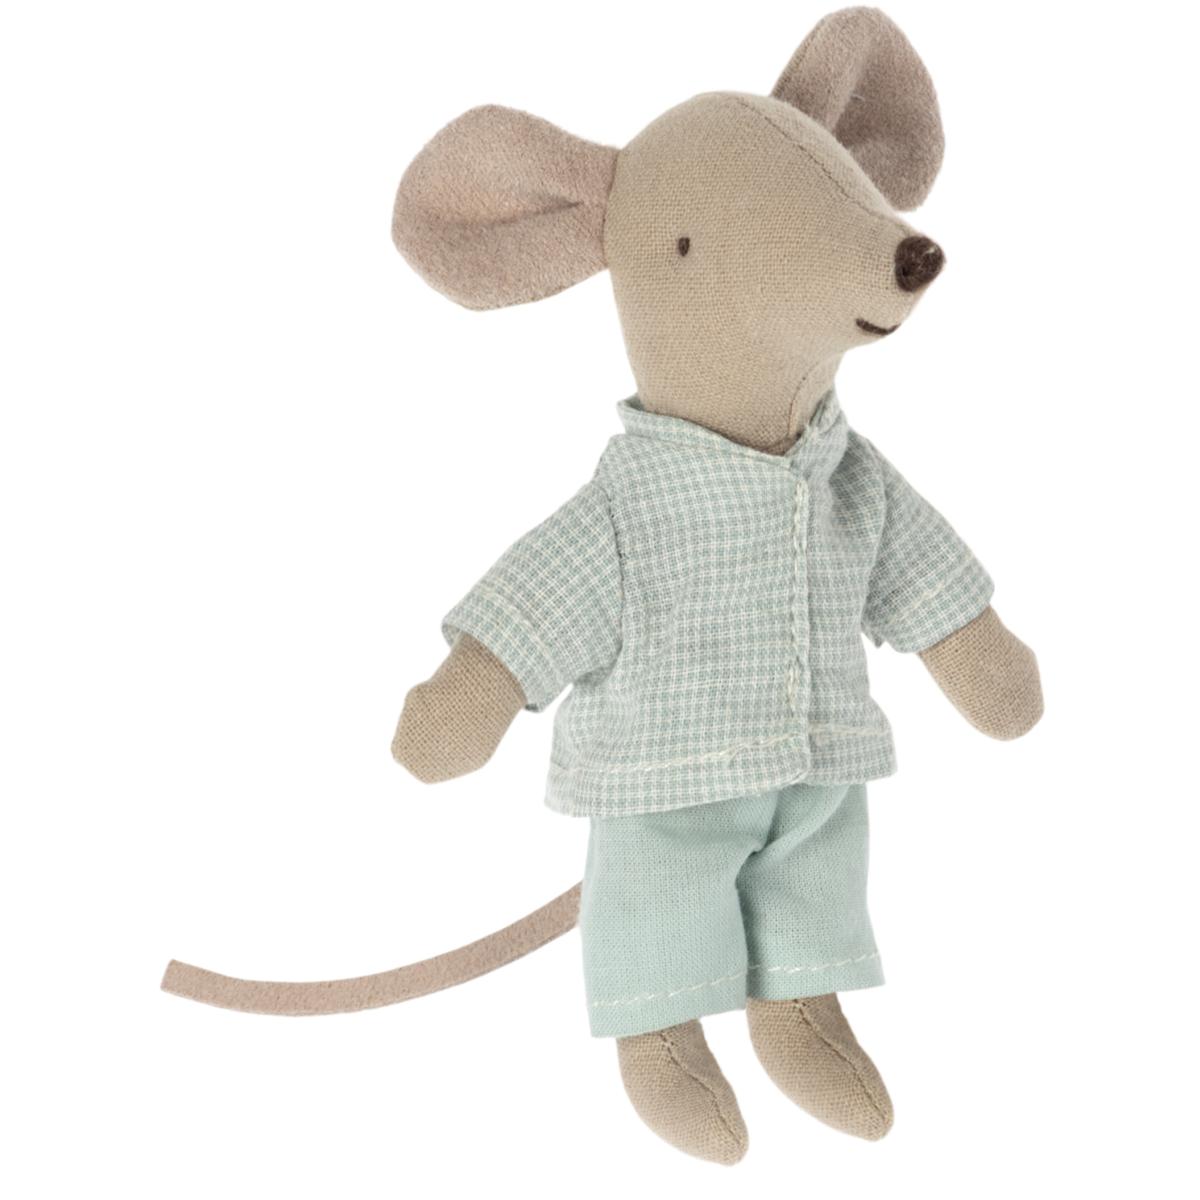 PYJAMAS FOR LITTLE BROTHER MOUSE